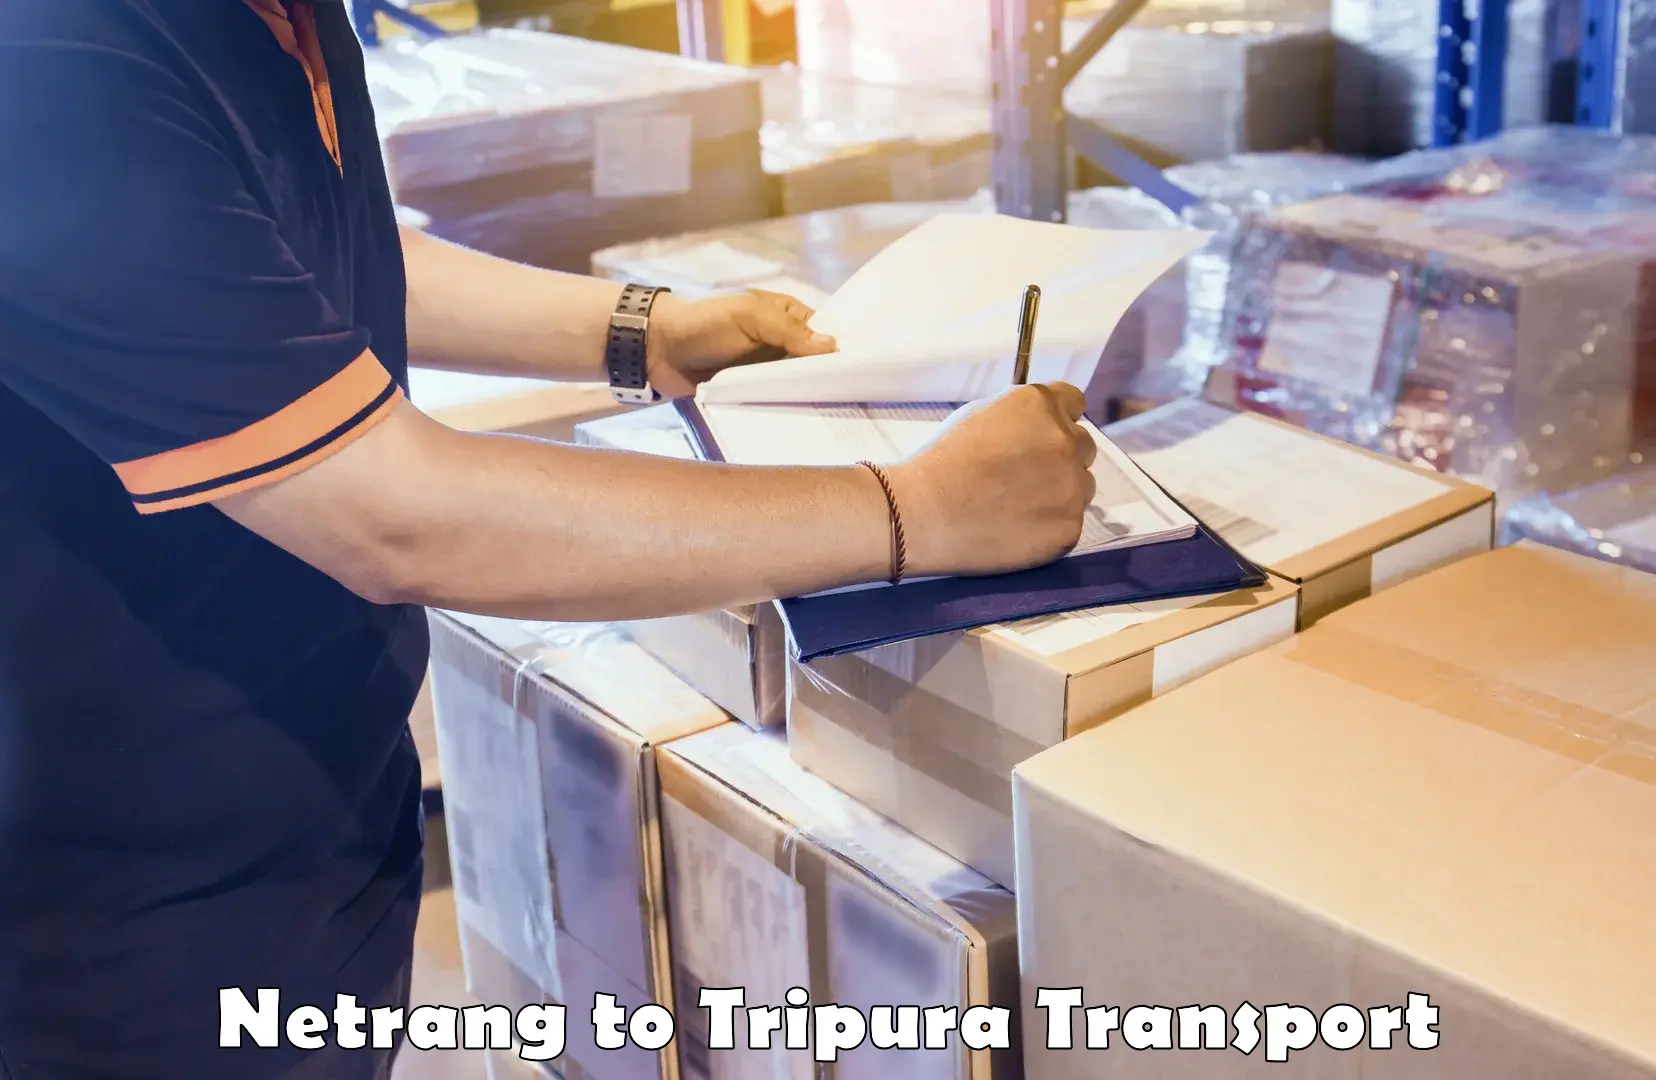 Delivery service Netrang to Udaipur Tripura